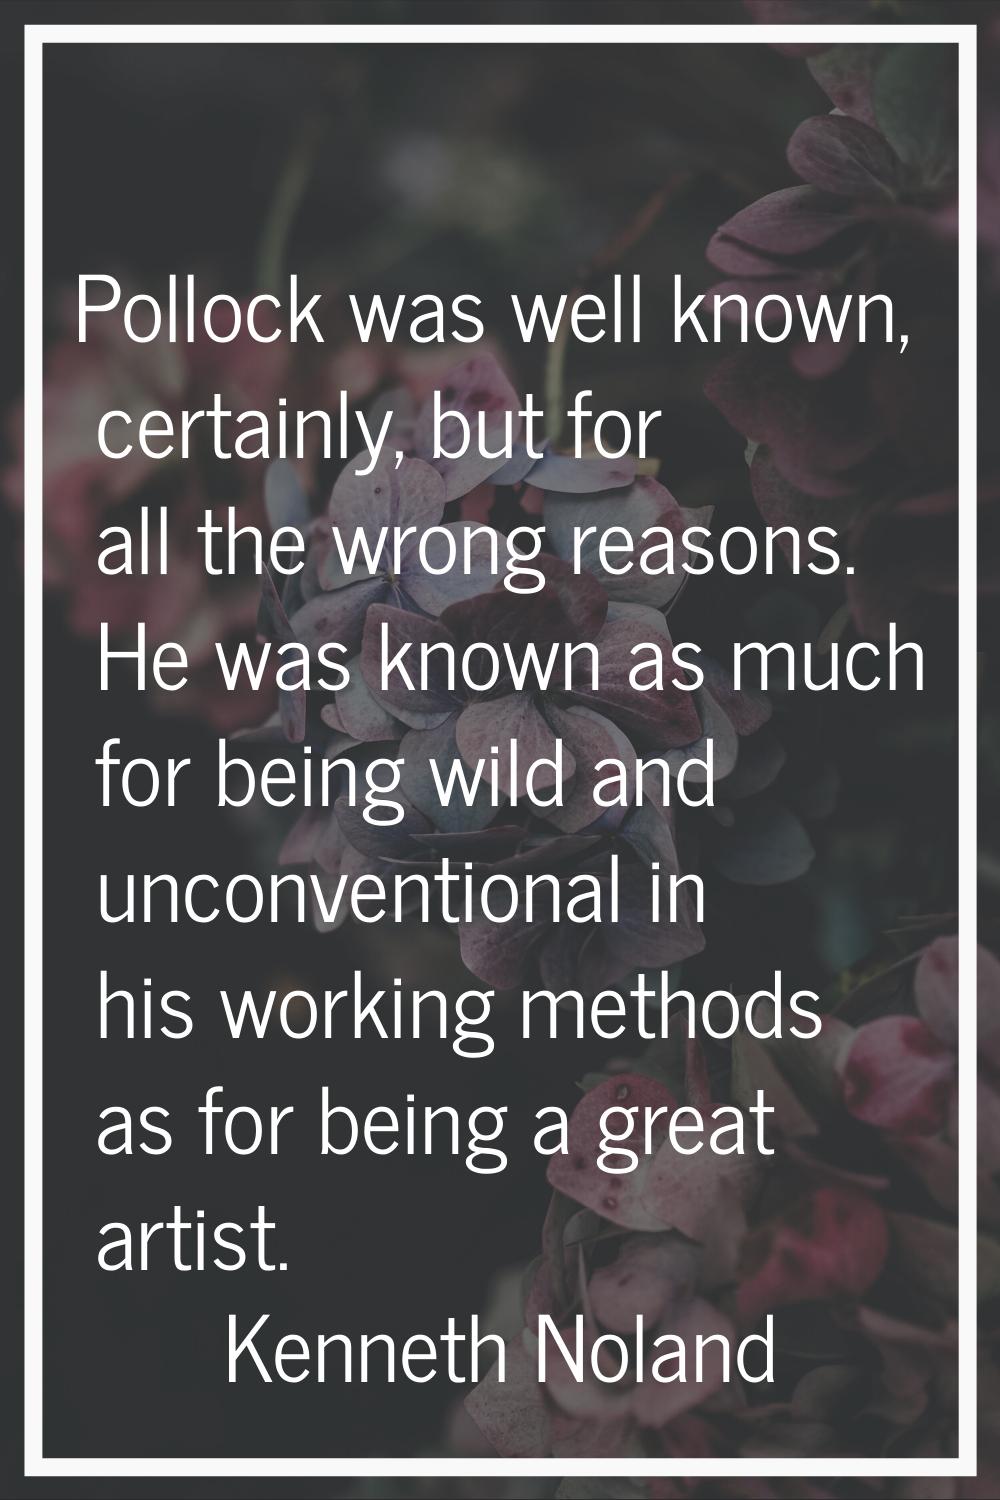 Pollock was well known, certainly, but for all the wrong reasons. He was known as much for being wi